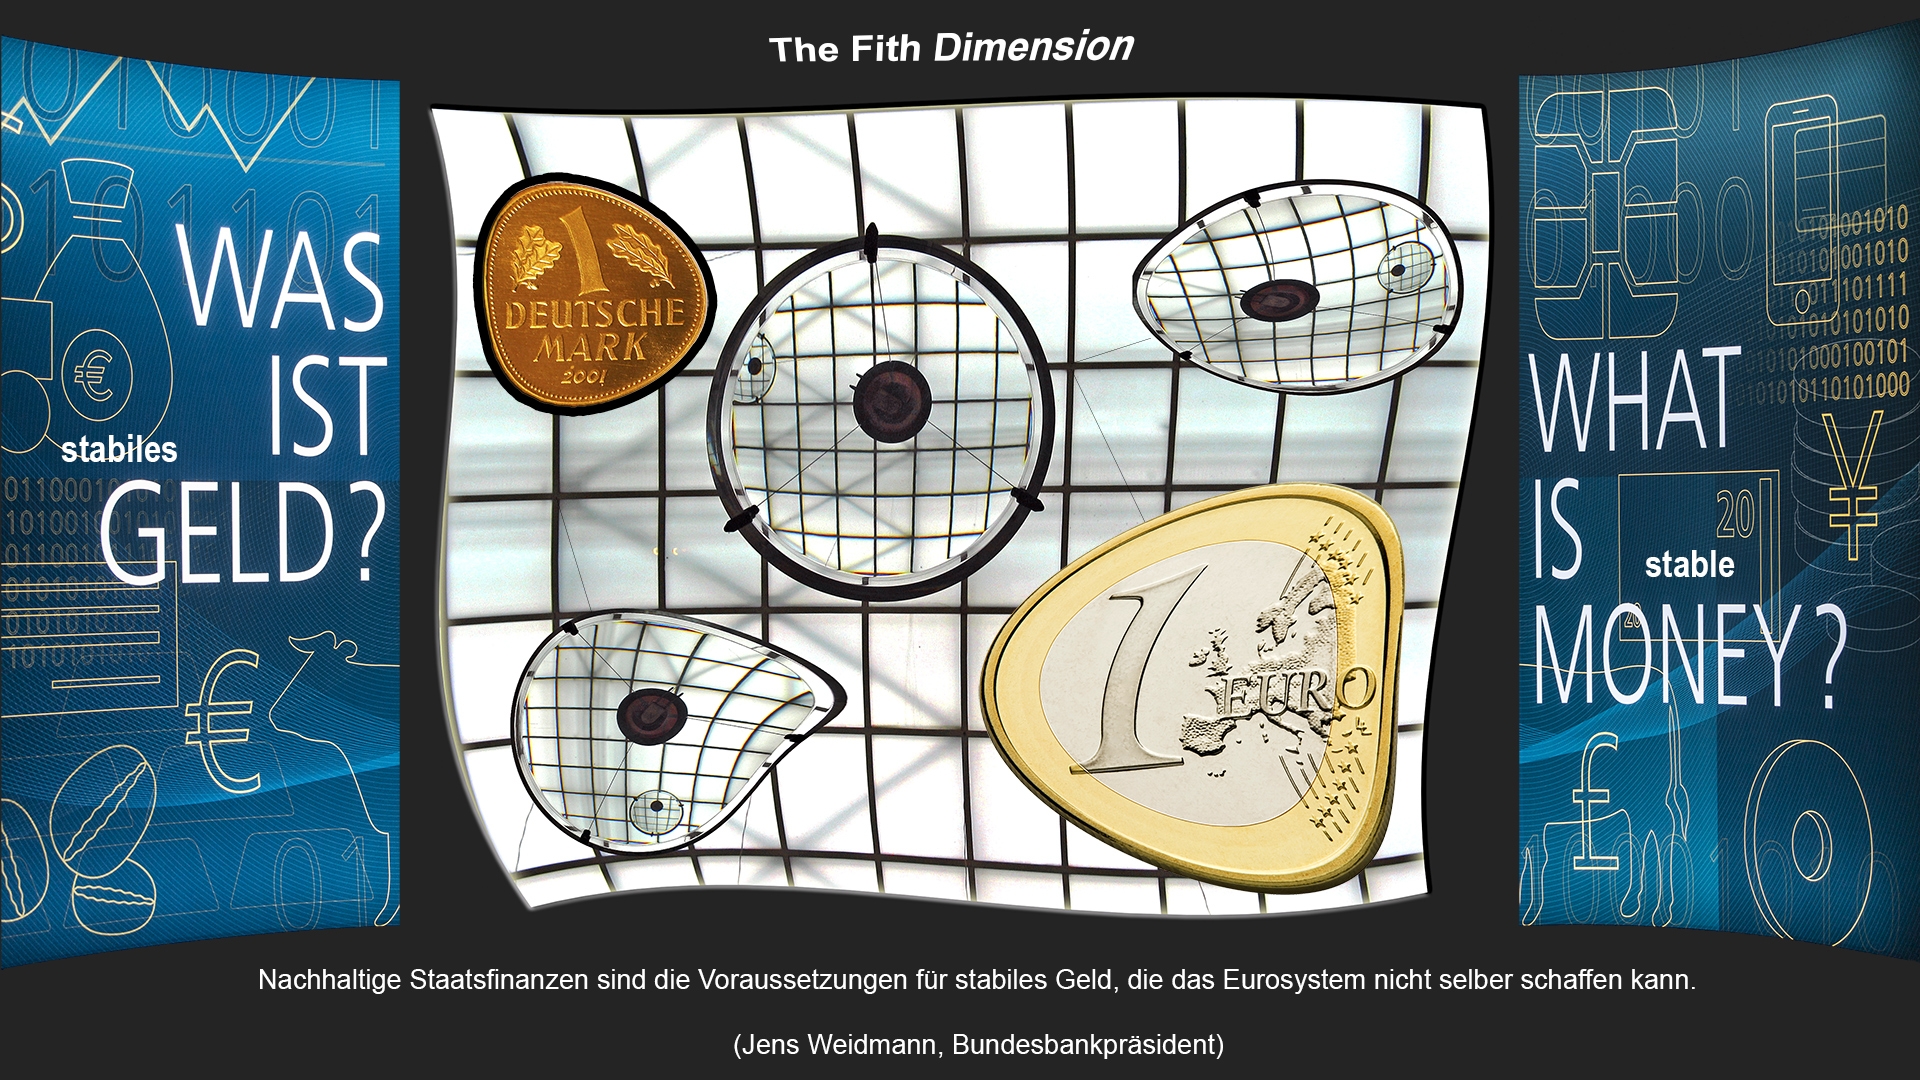 THE FITH DIMENSION - STABLE MONEY